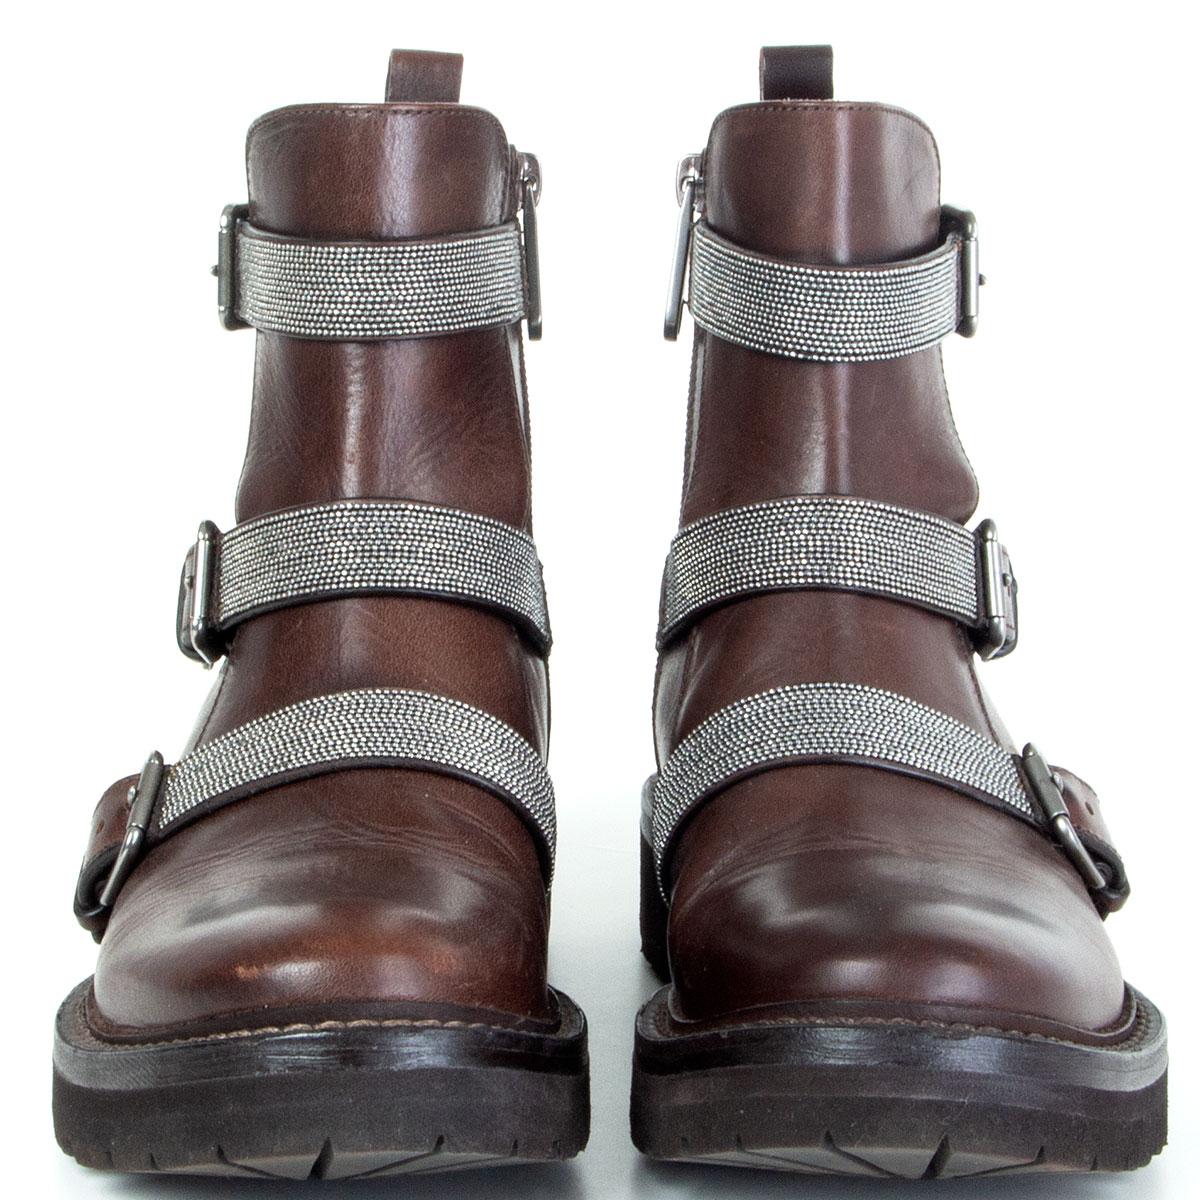 authentic Brunello Cucinelli Monili Triple Strap Moto boots in brown calfskin with metallic beaded buckles. Openw ith a zipper on the inside. Vibram rubber sole. Have been worn and are in excellent condition. 

Imprinted Size 37
Shoe Size 37
Inside